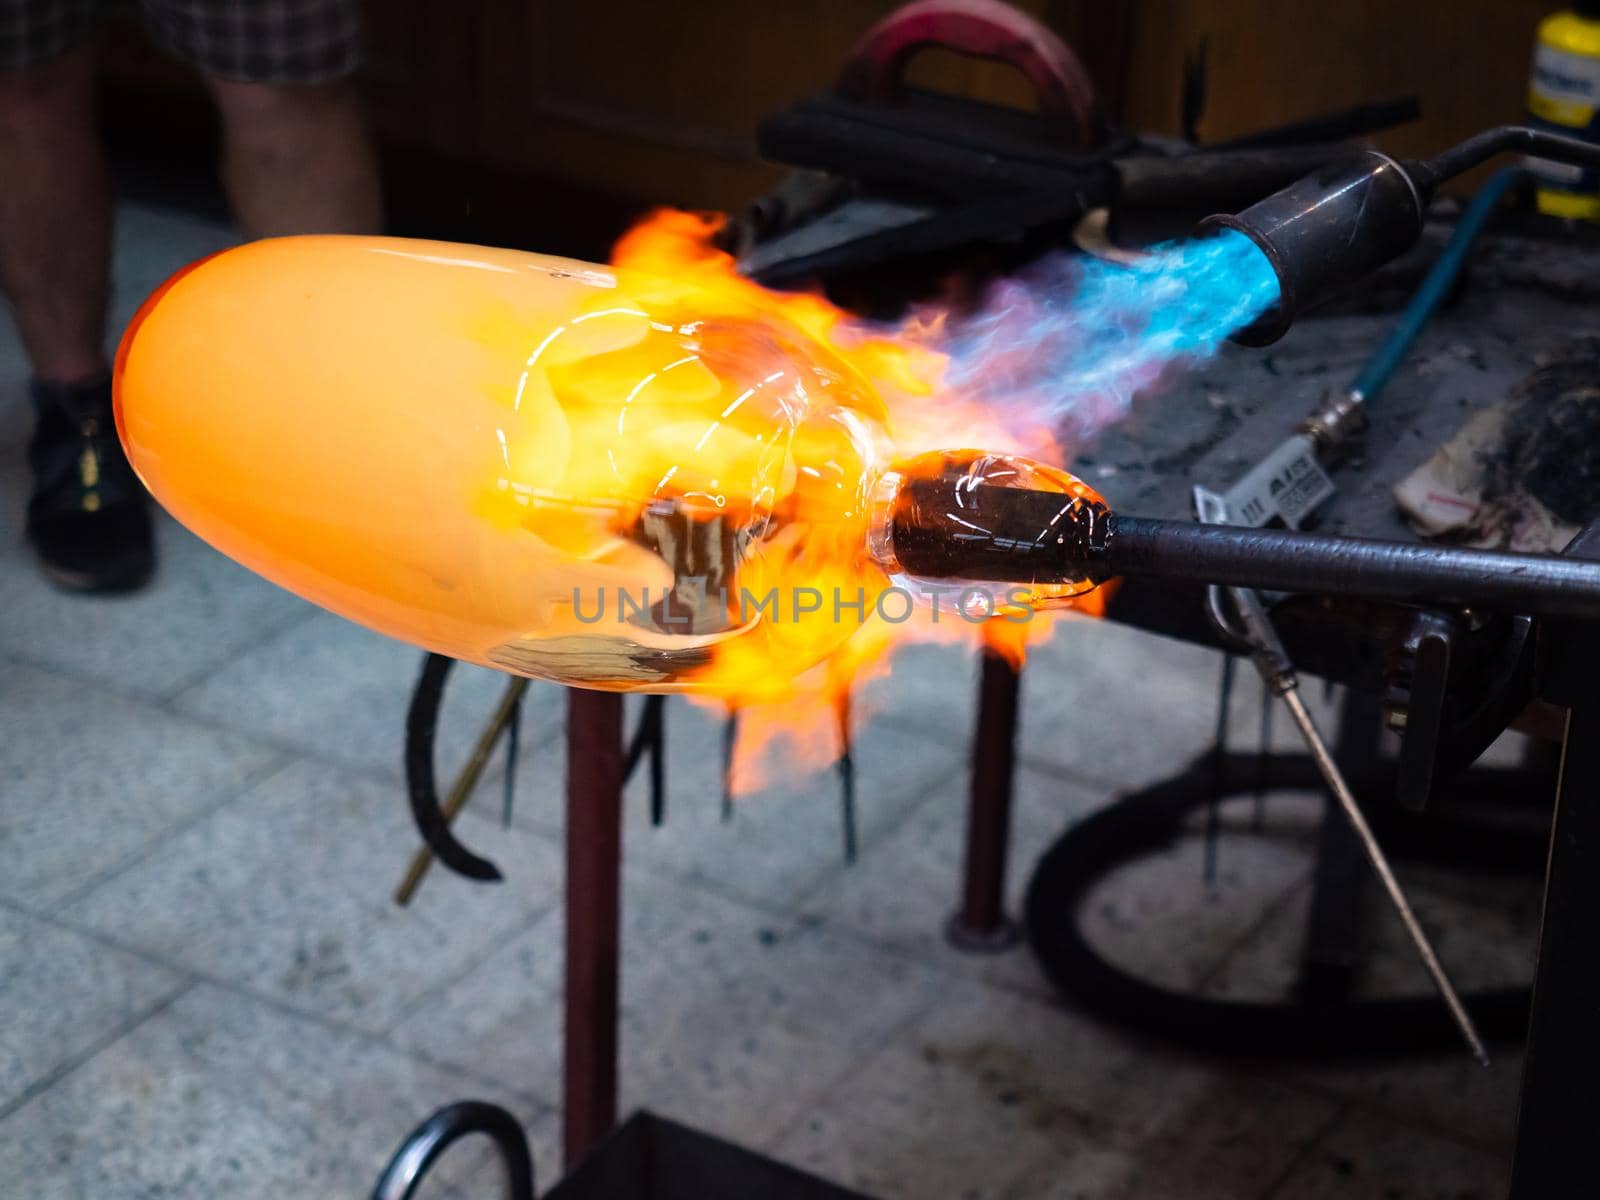 Artist glass blowing process. The glassblower master with co-workers are creating an amazing piece of art from molten glass